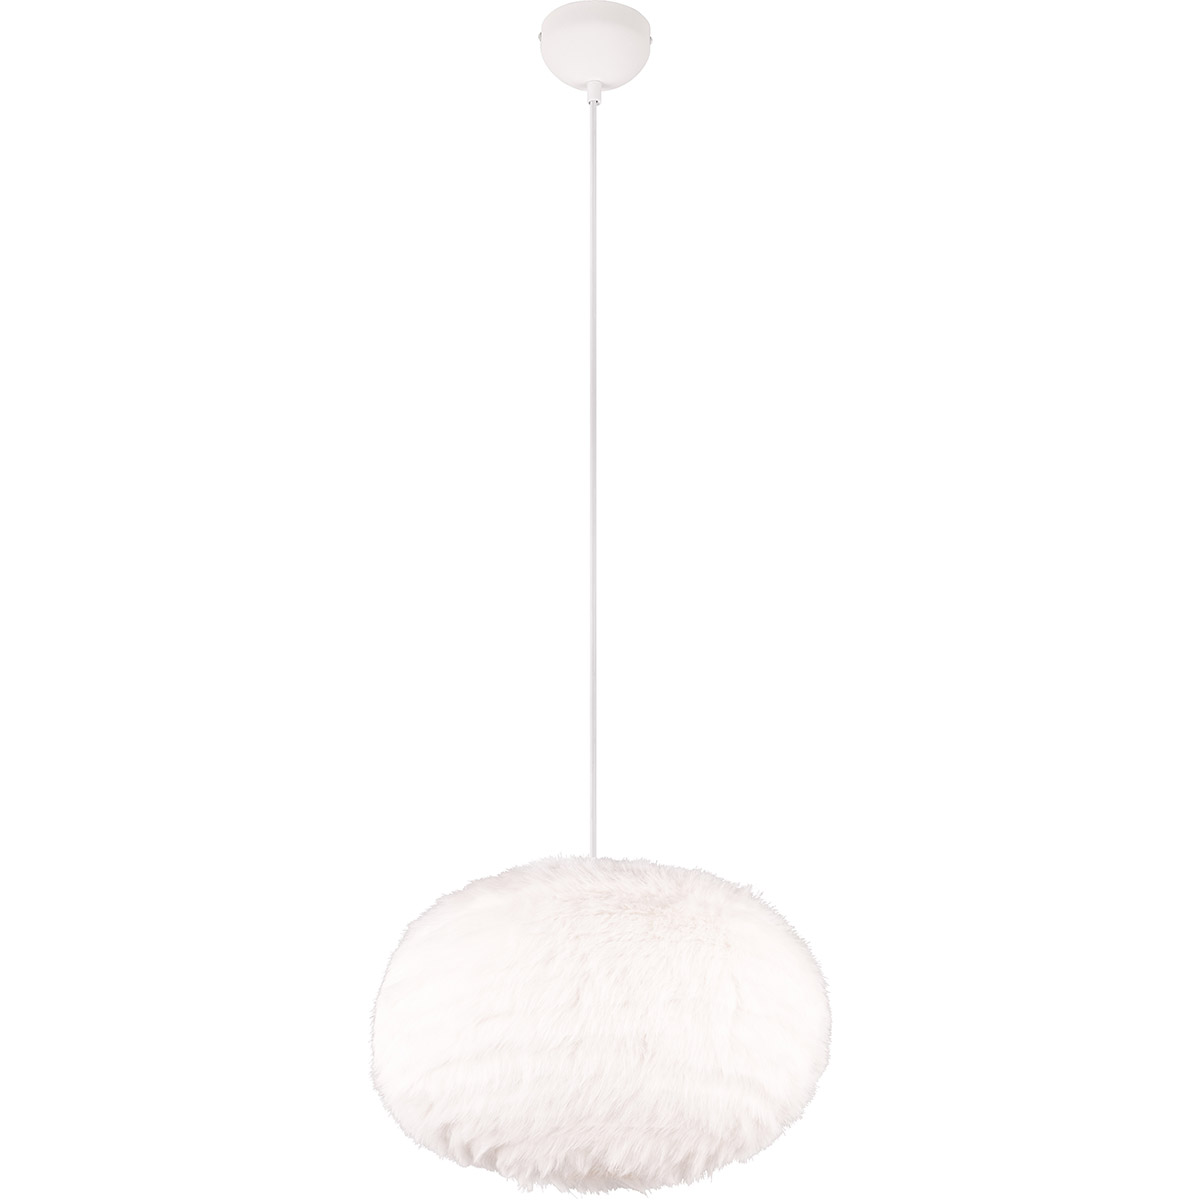 BES LED LED Hanglamp - Trion Fluffy XL - E27 Fitting - 1-lichts - Rond - Taupe - Synthetik Pluche